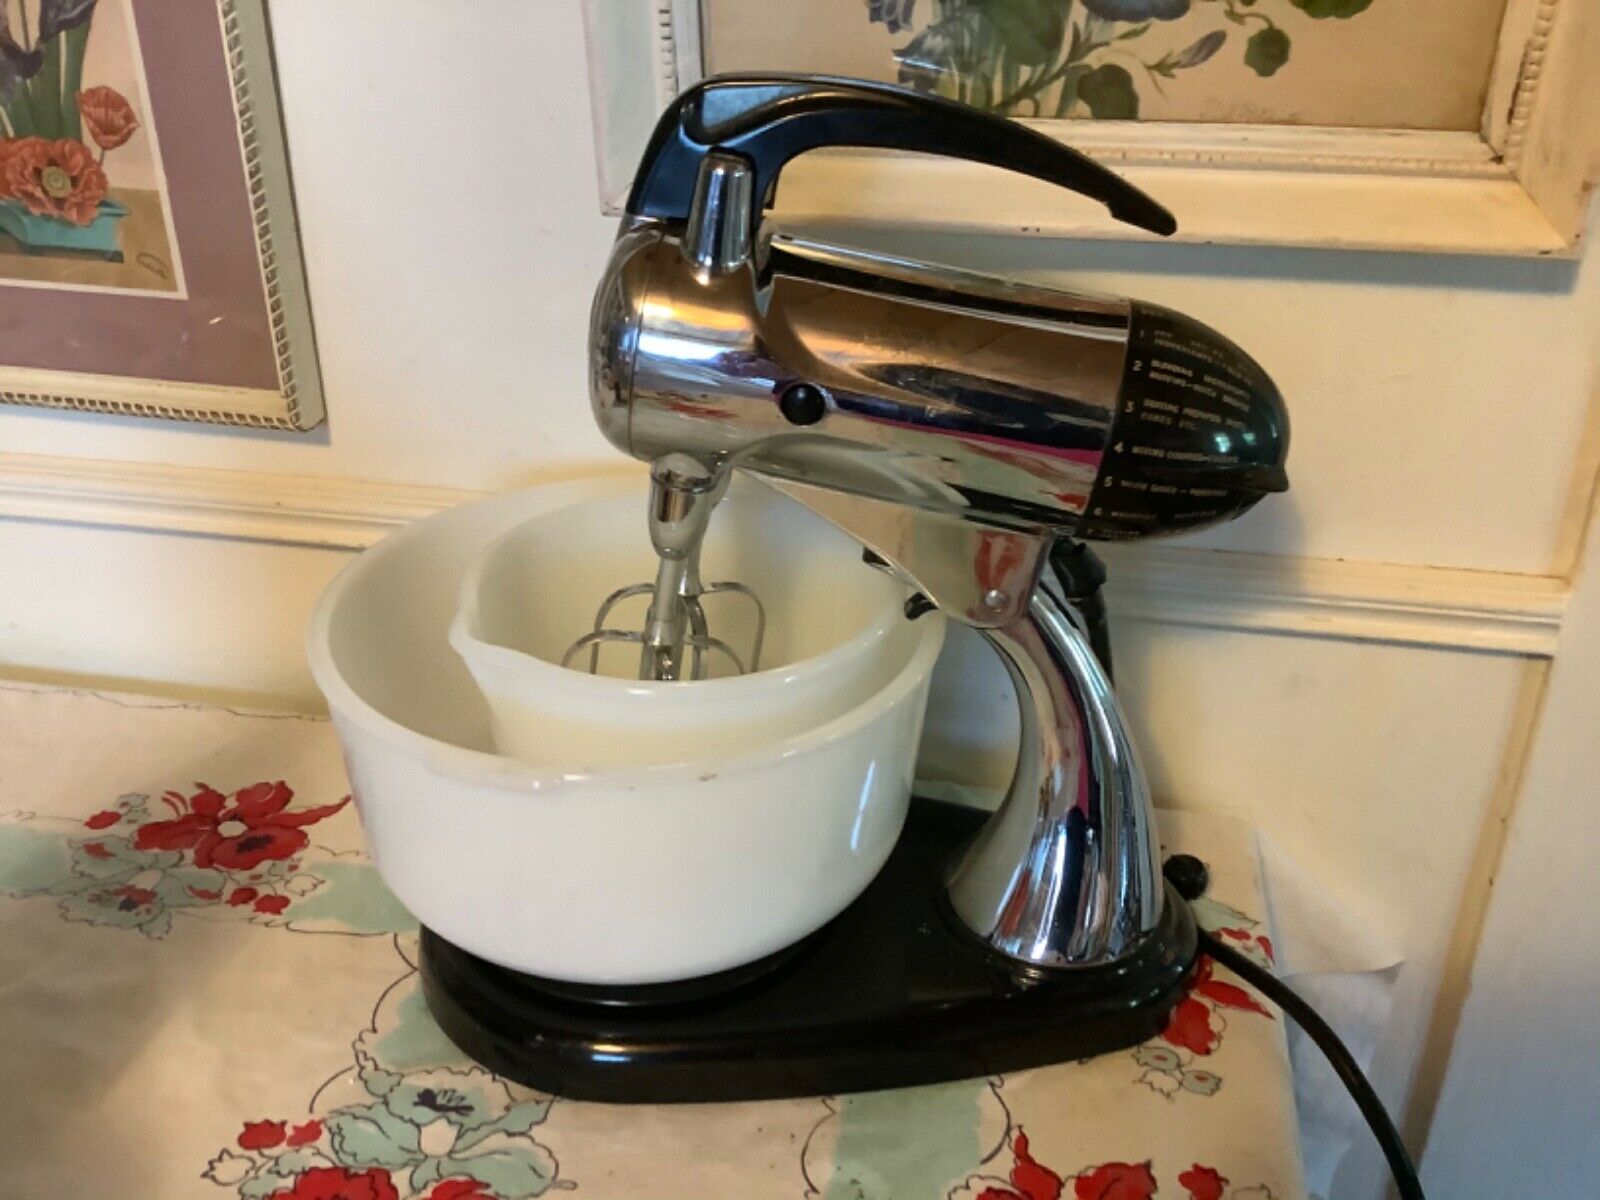 Powerhouse Collection - 'Mixmaster' electric food mixer made by Sunbeam